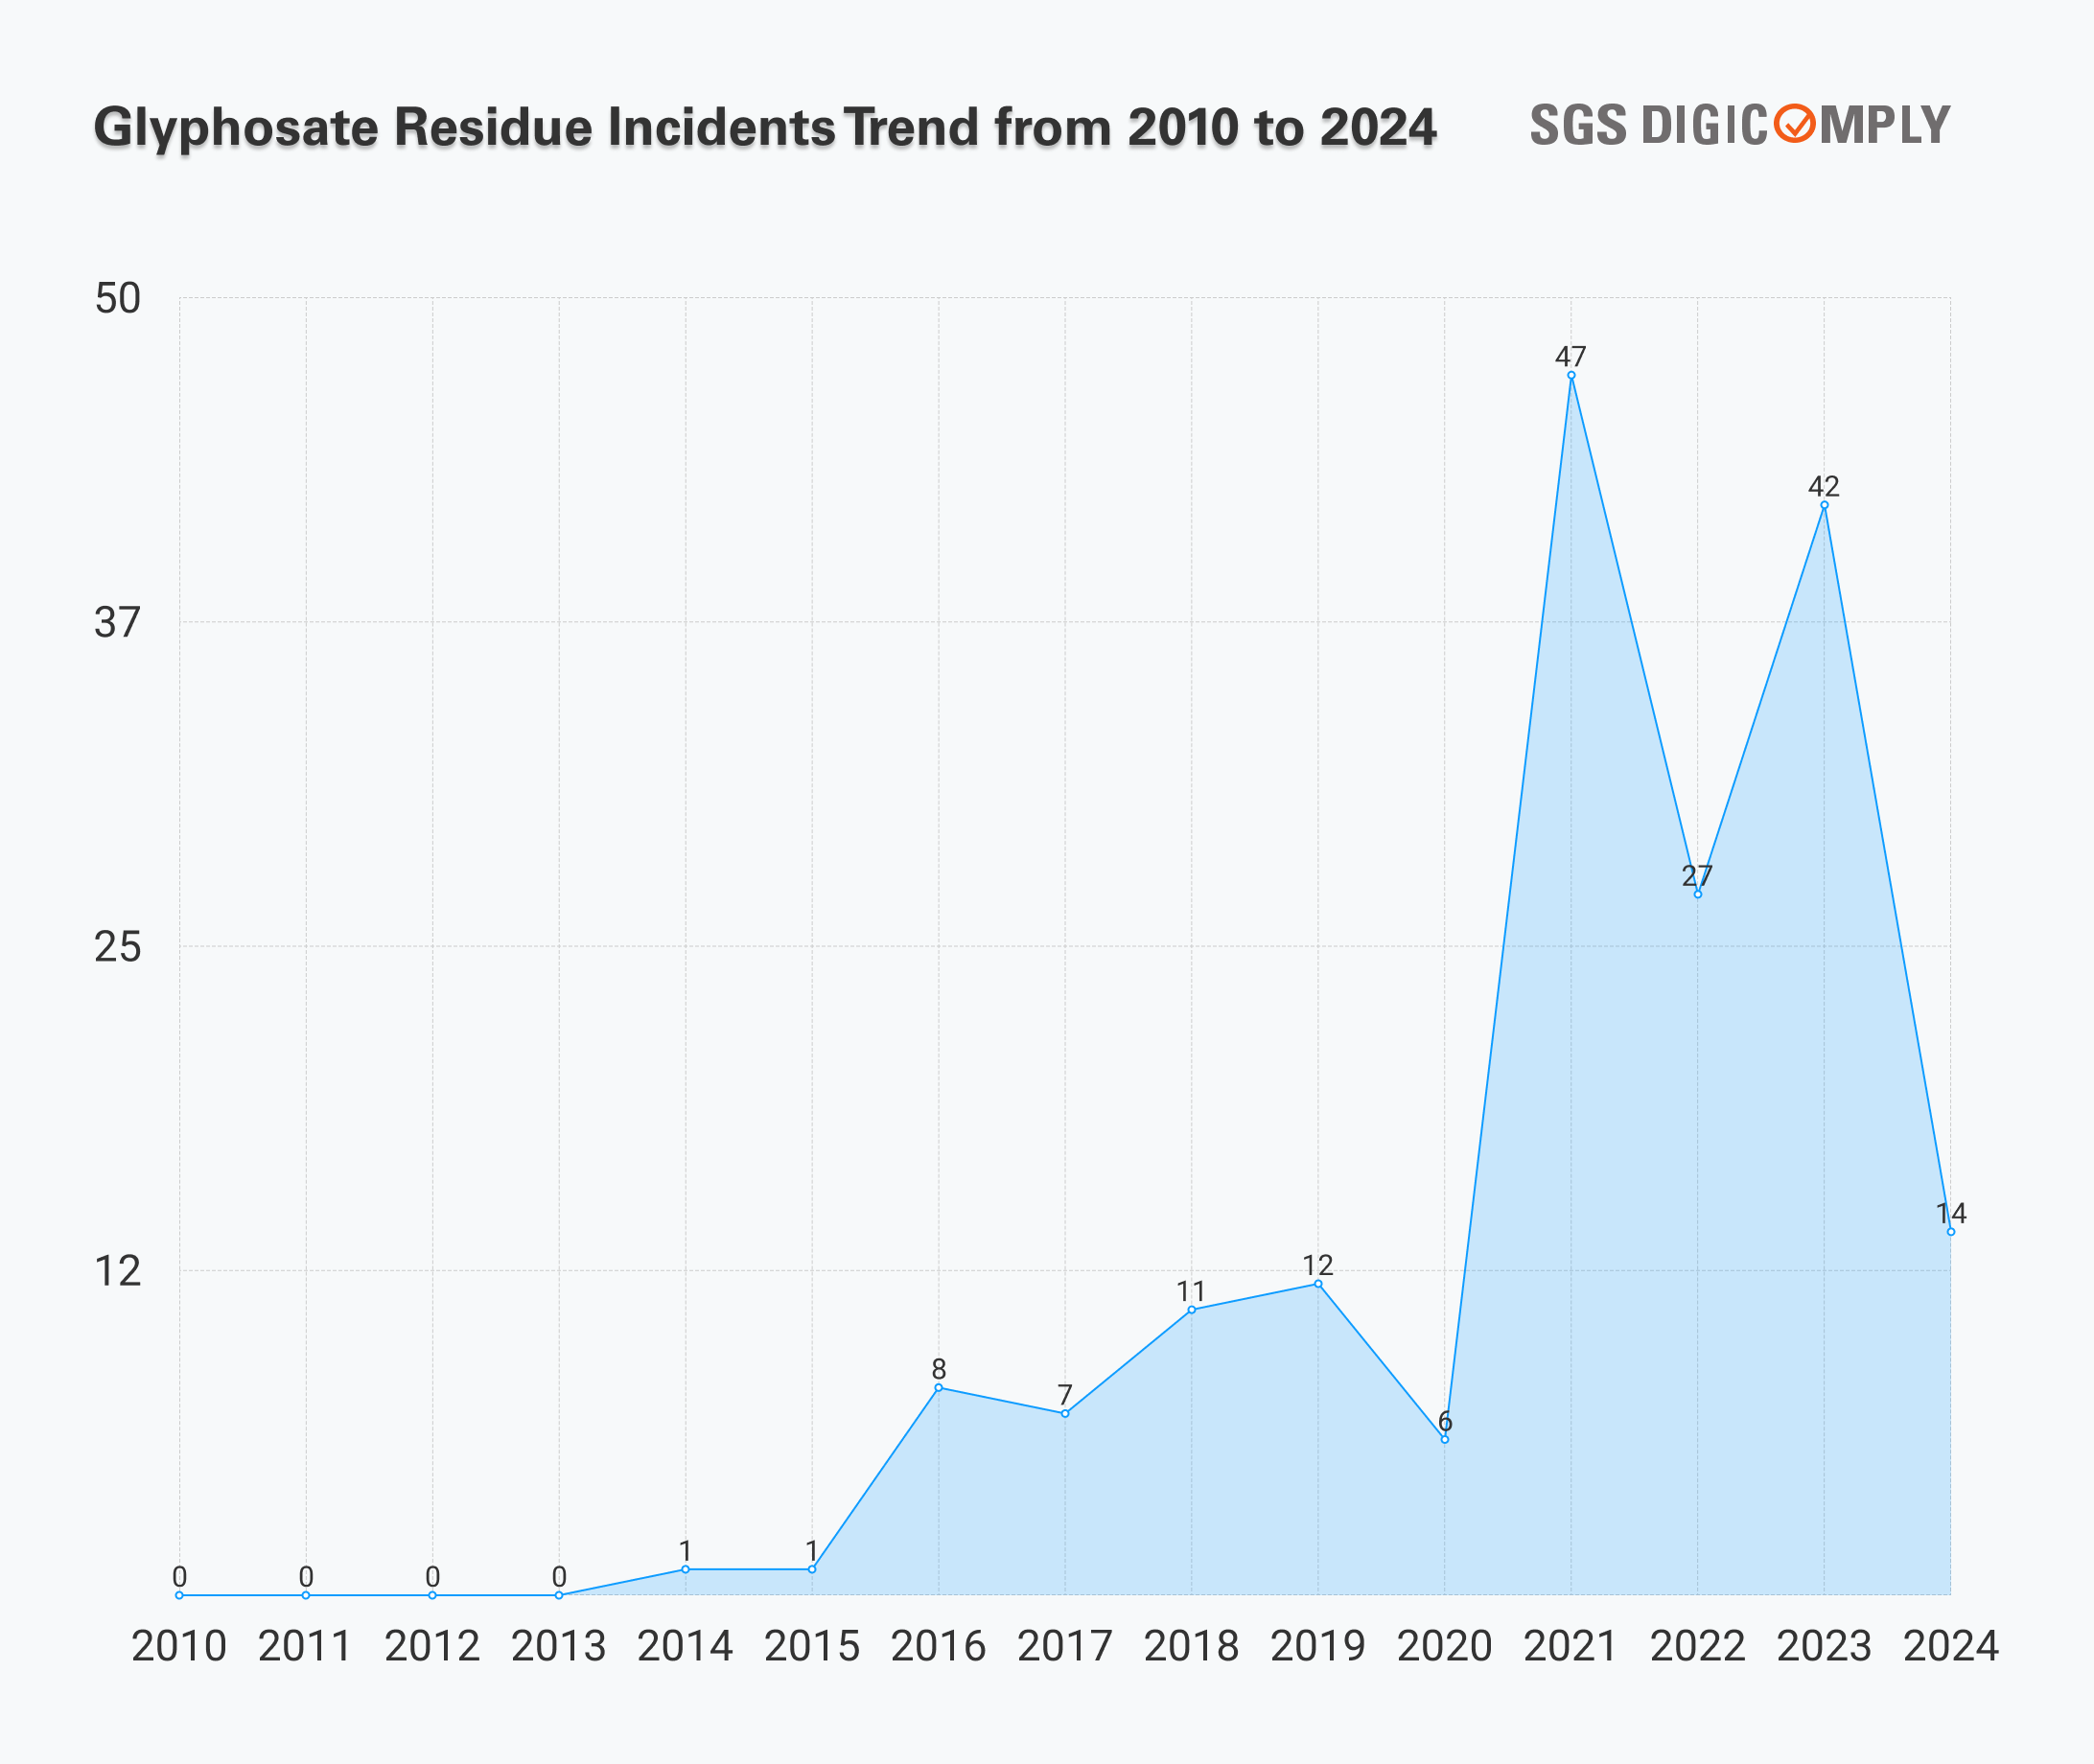 Glyphosate Residue Incidents Trend from 2010 to 2024